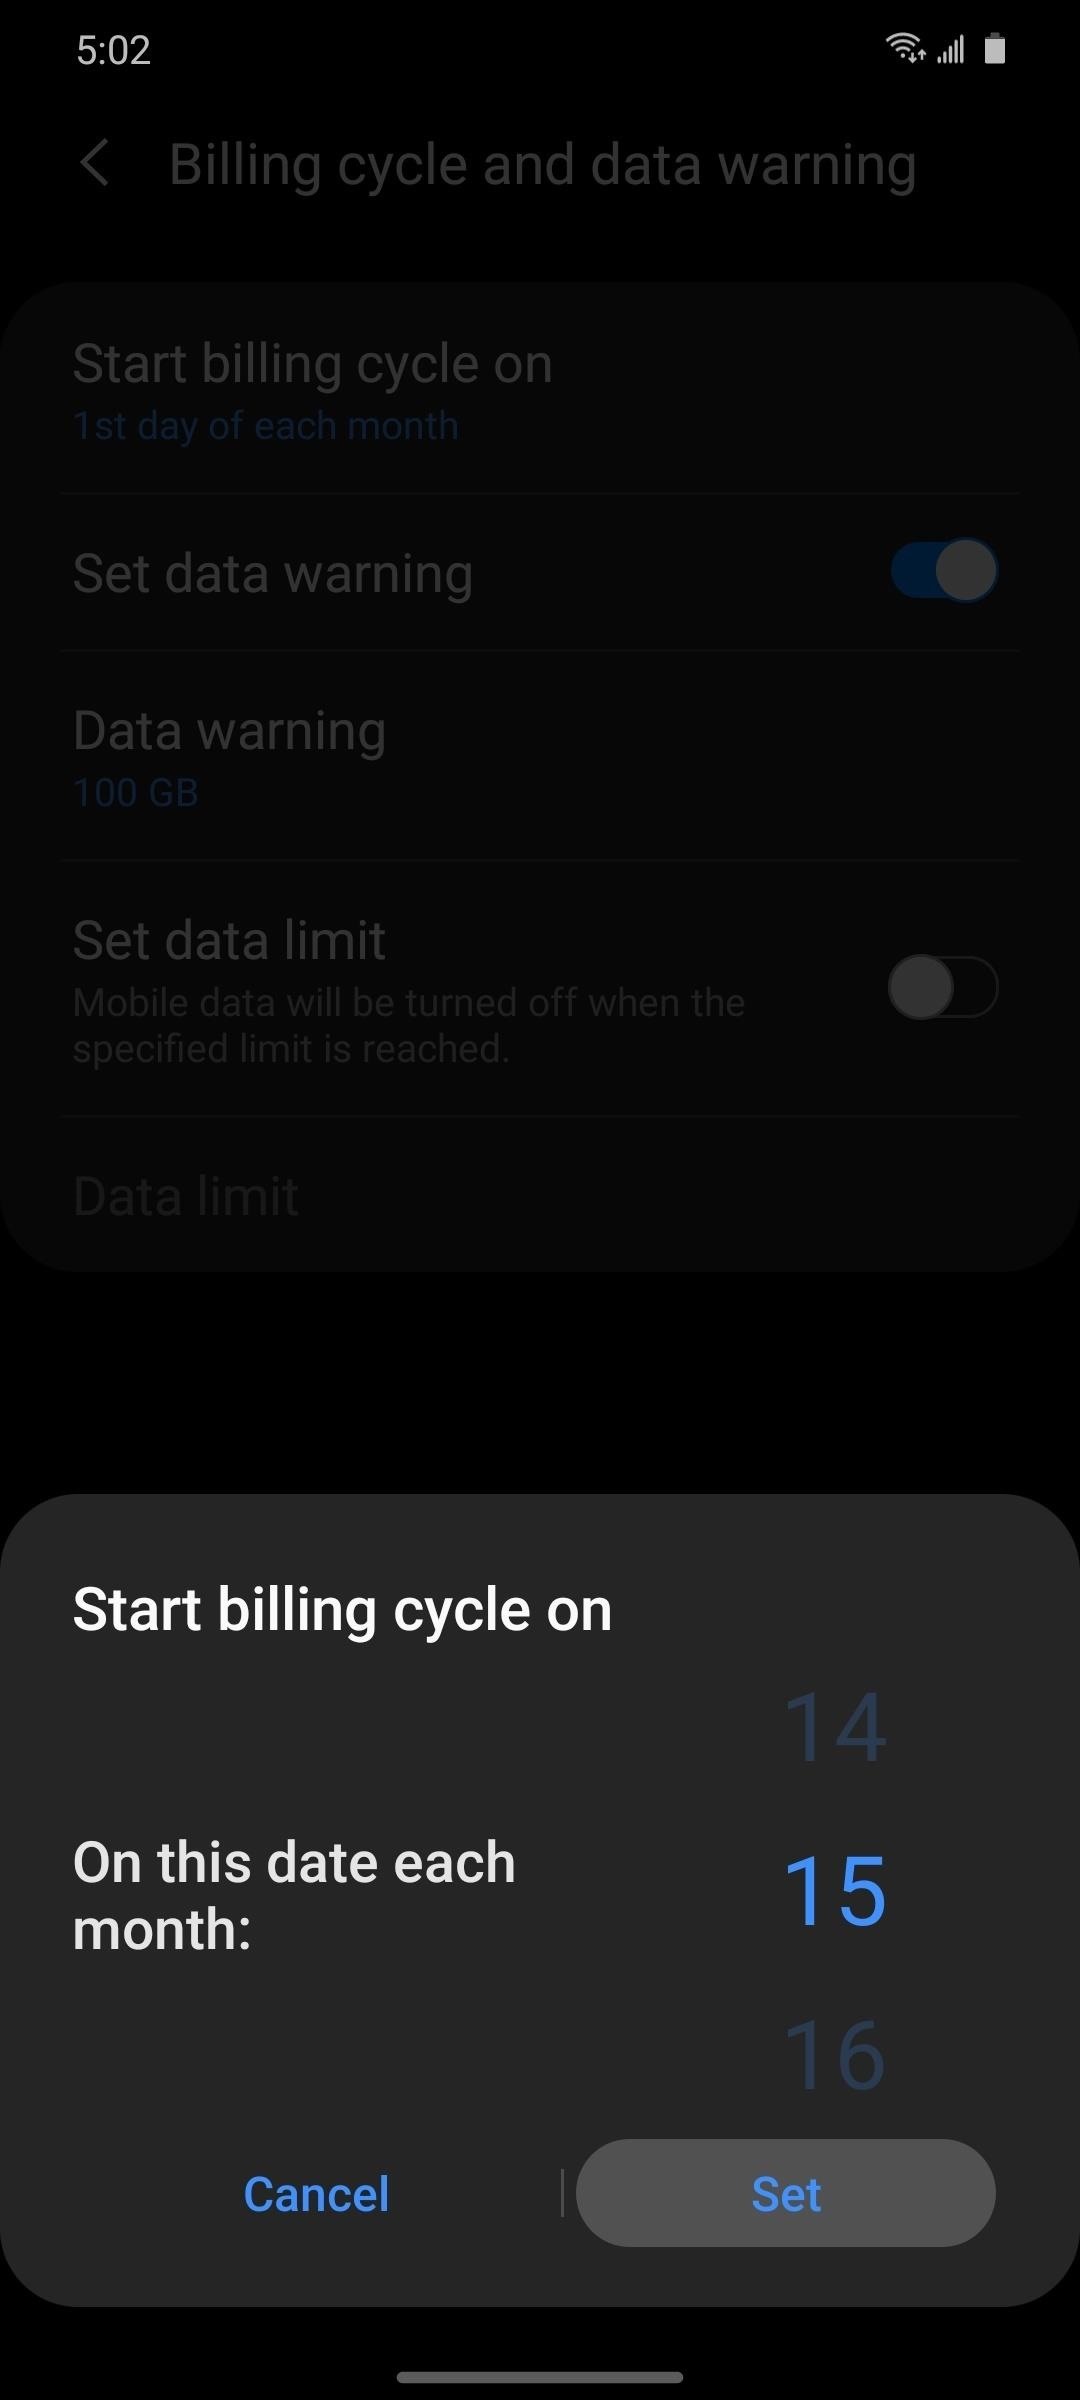 How to Track Your Own Mobile Data Usage on iPhone or Android